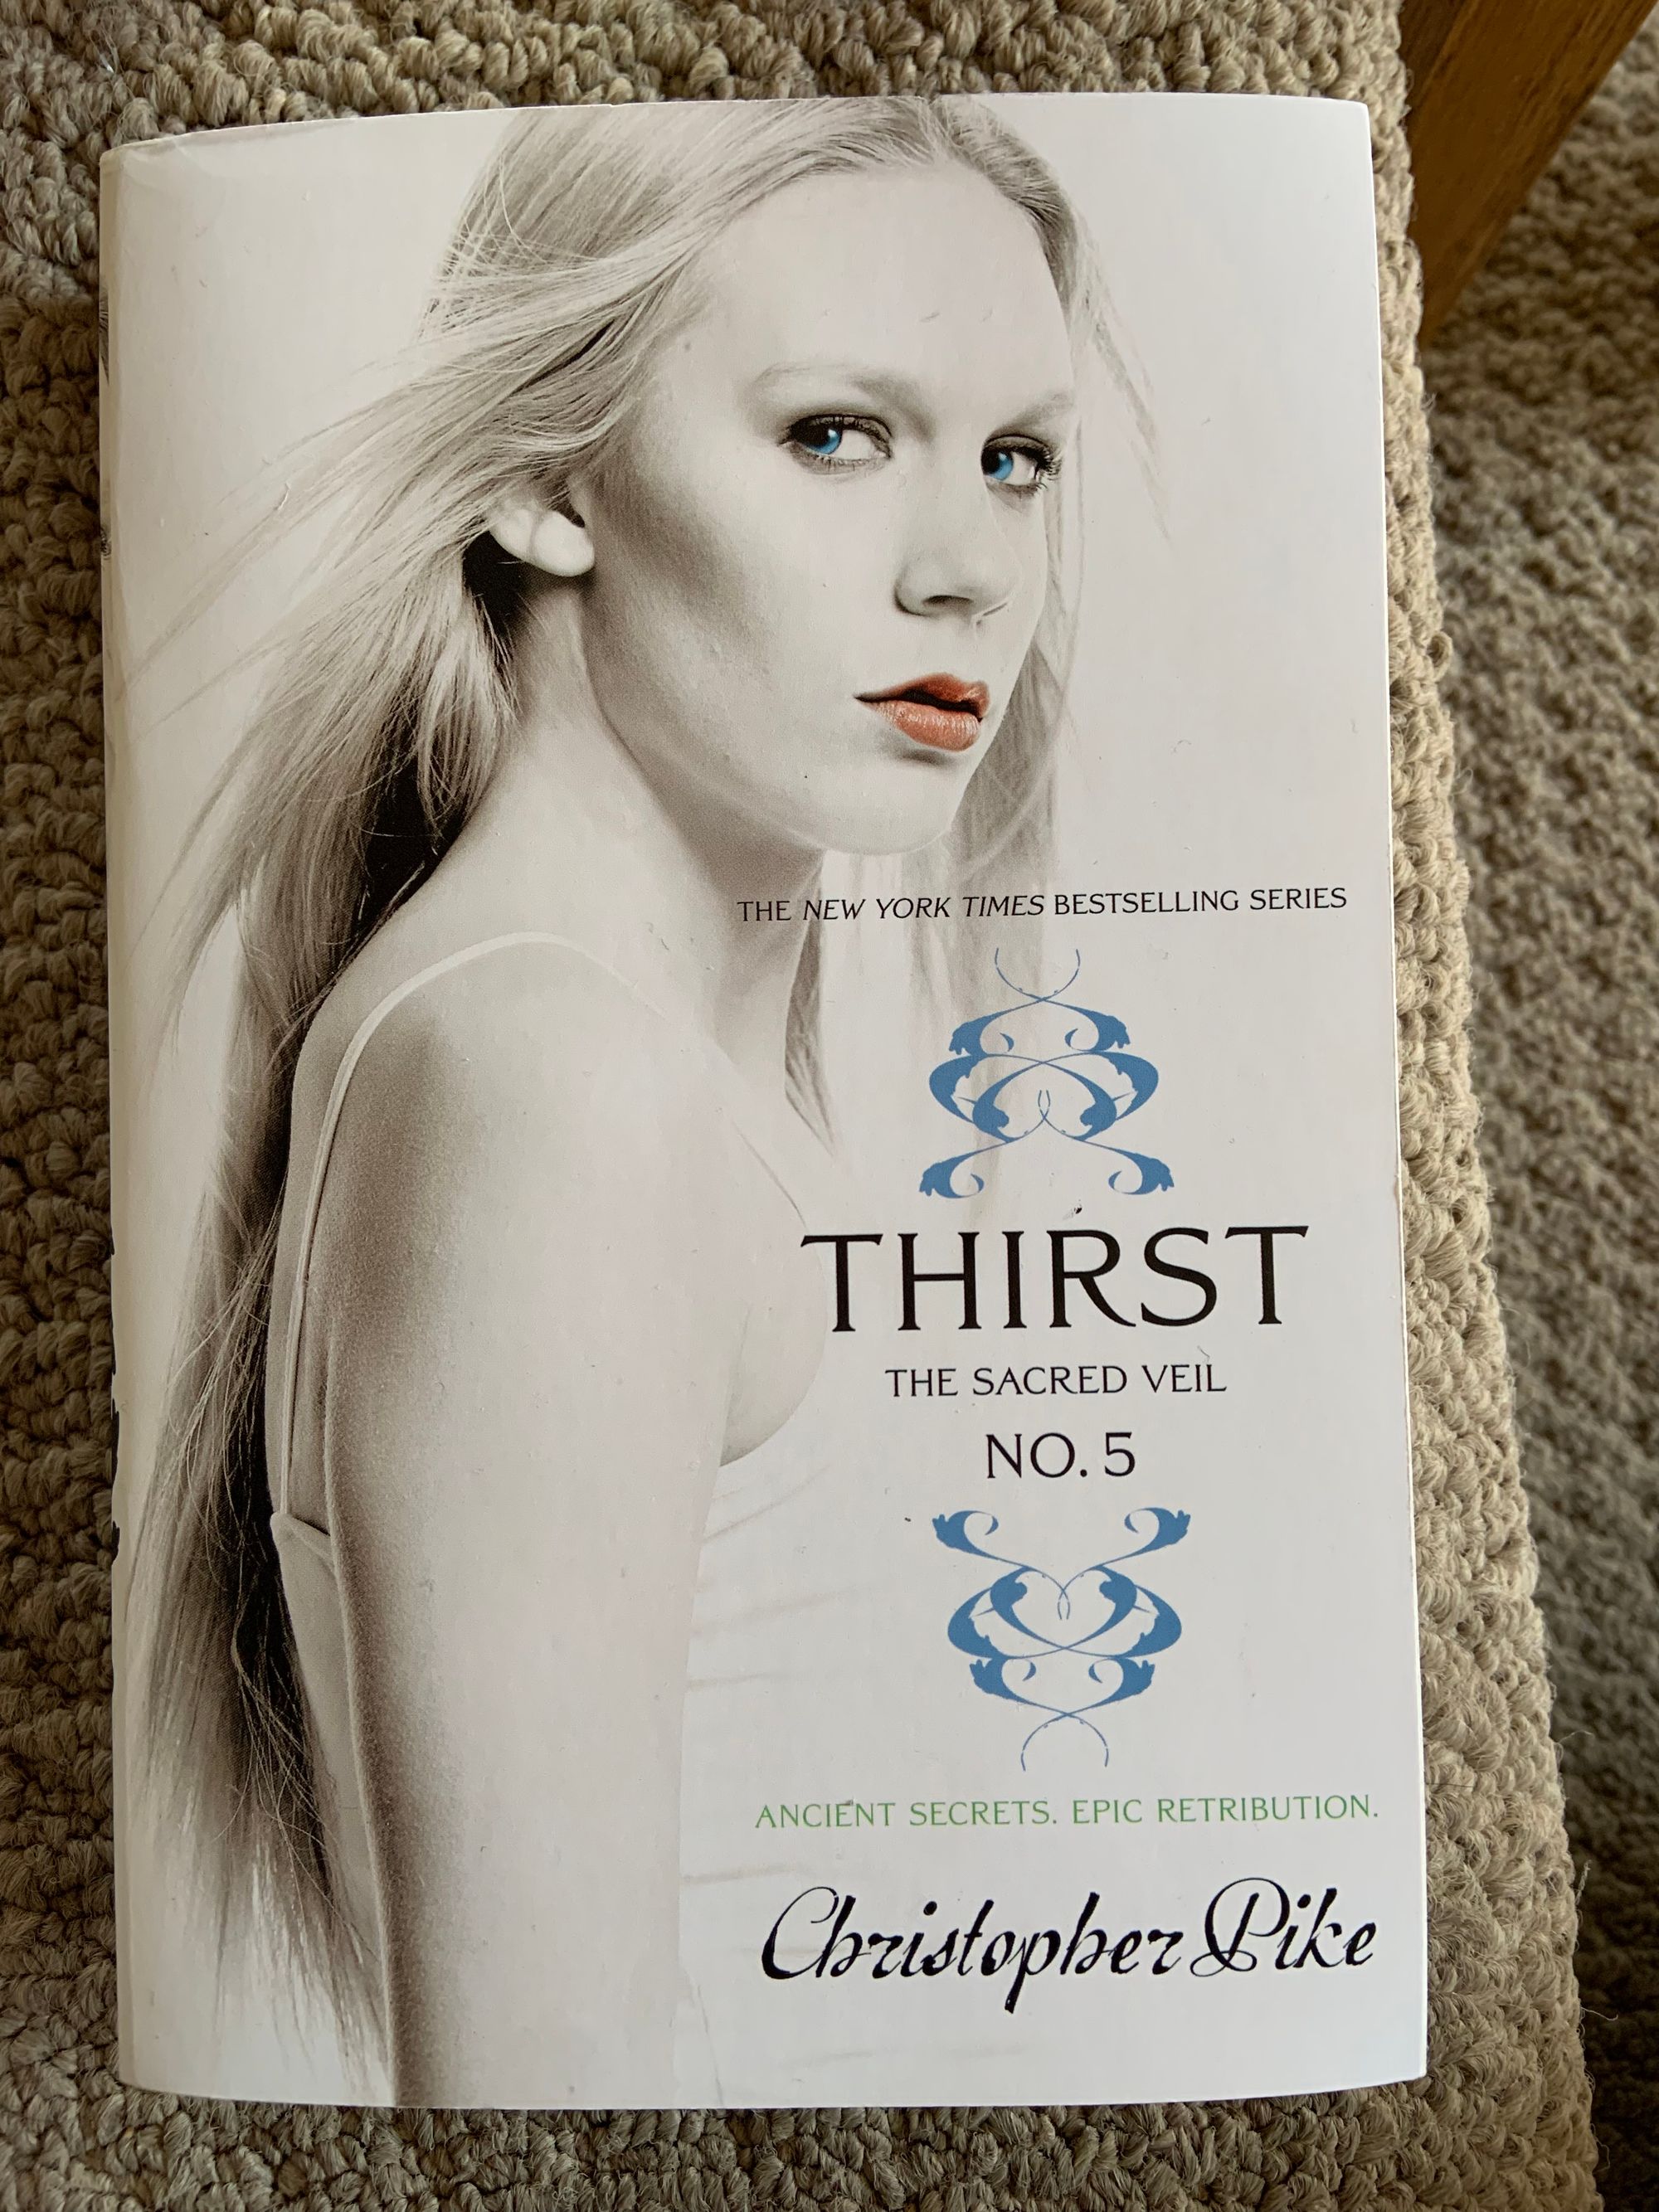 Paperback copy of Thirst No. 5: The Sacred Veil by Christopher Pike featuring a blonde-haired white woman with blue eyes